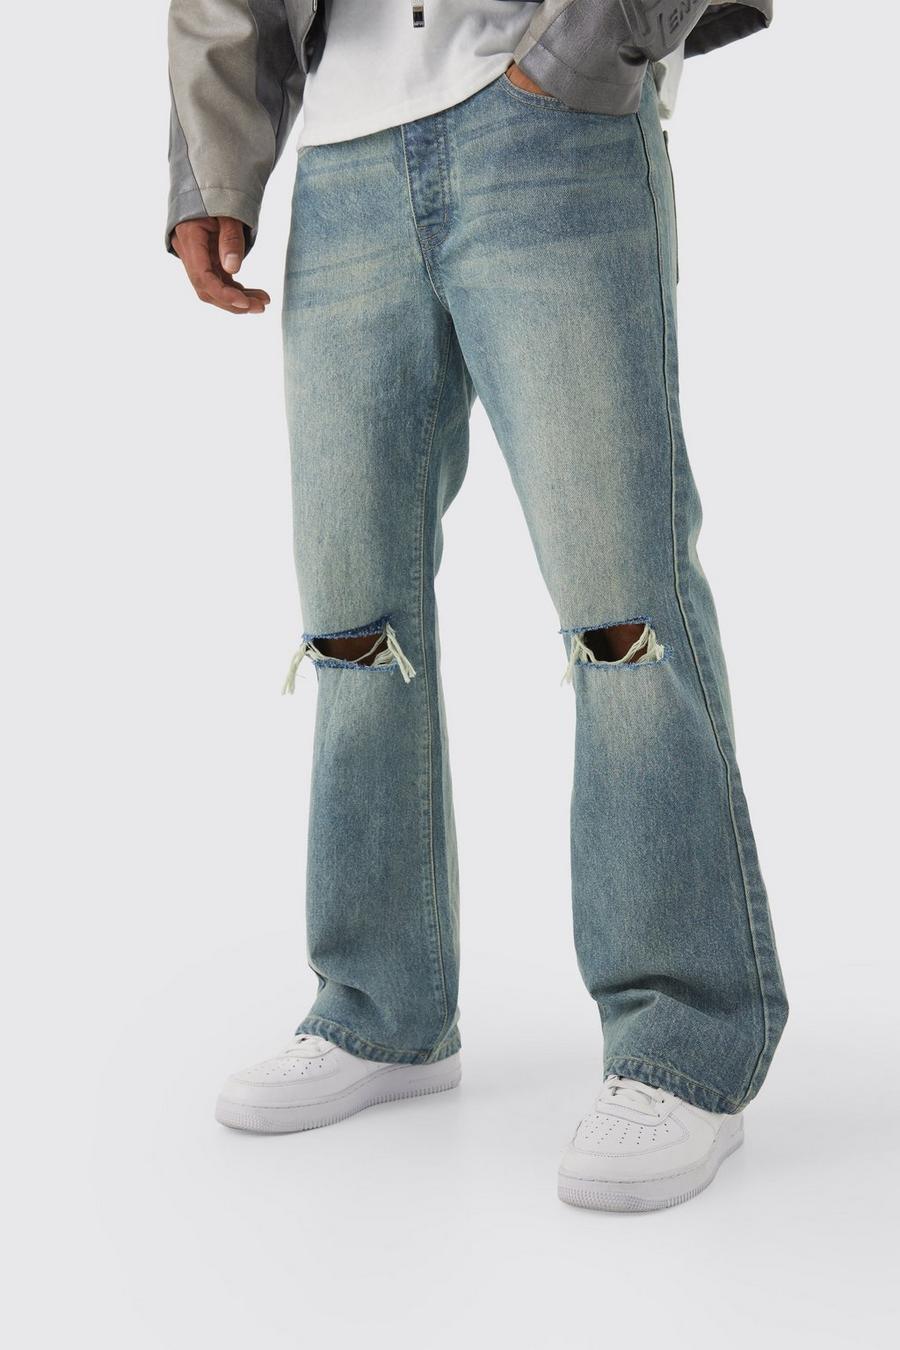 Denim Trousers Men Skinny Ripped Jeans Pants Stretch Distressed